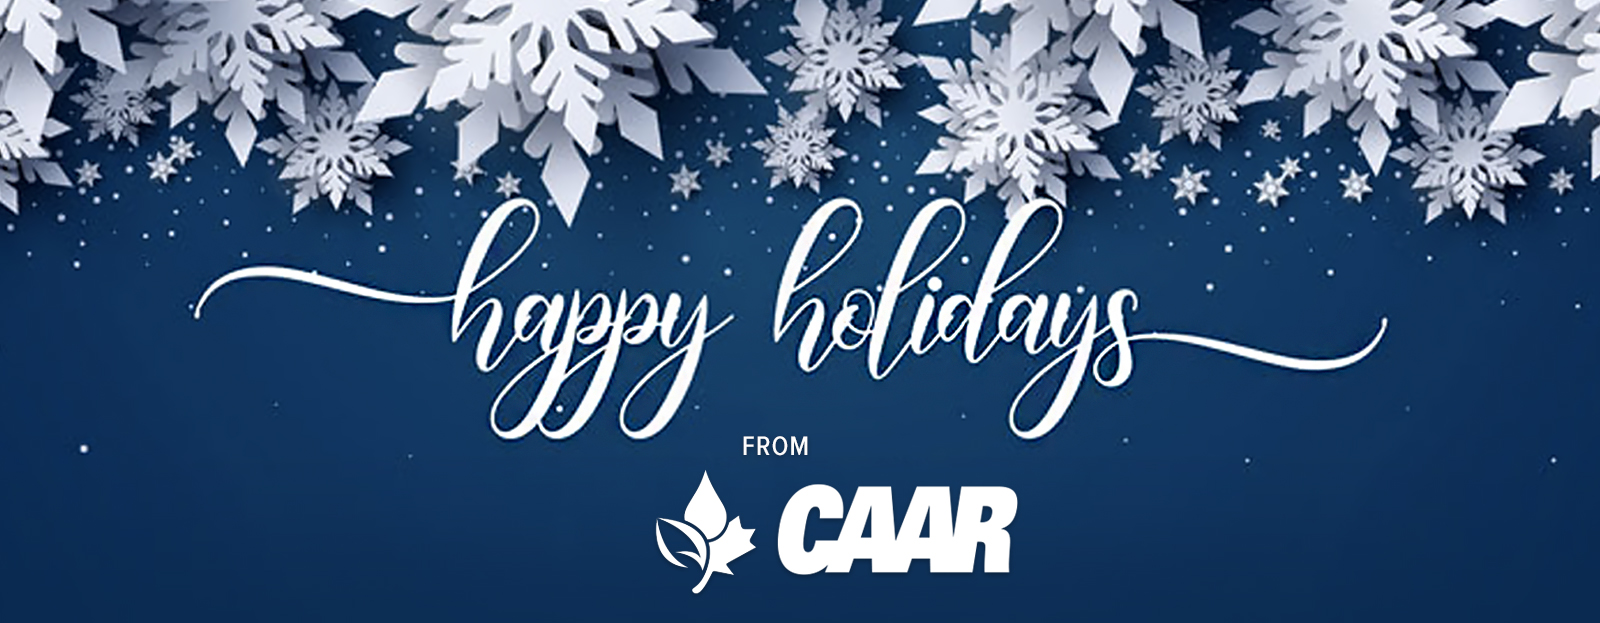 Banner for Happy Holidays from CAAR 